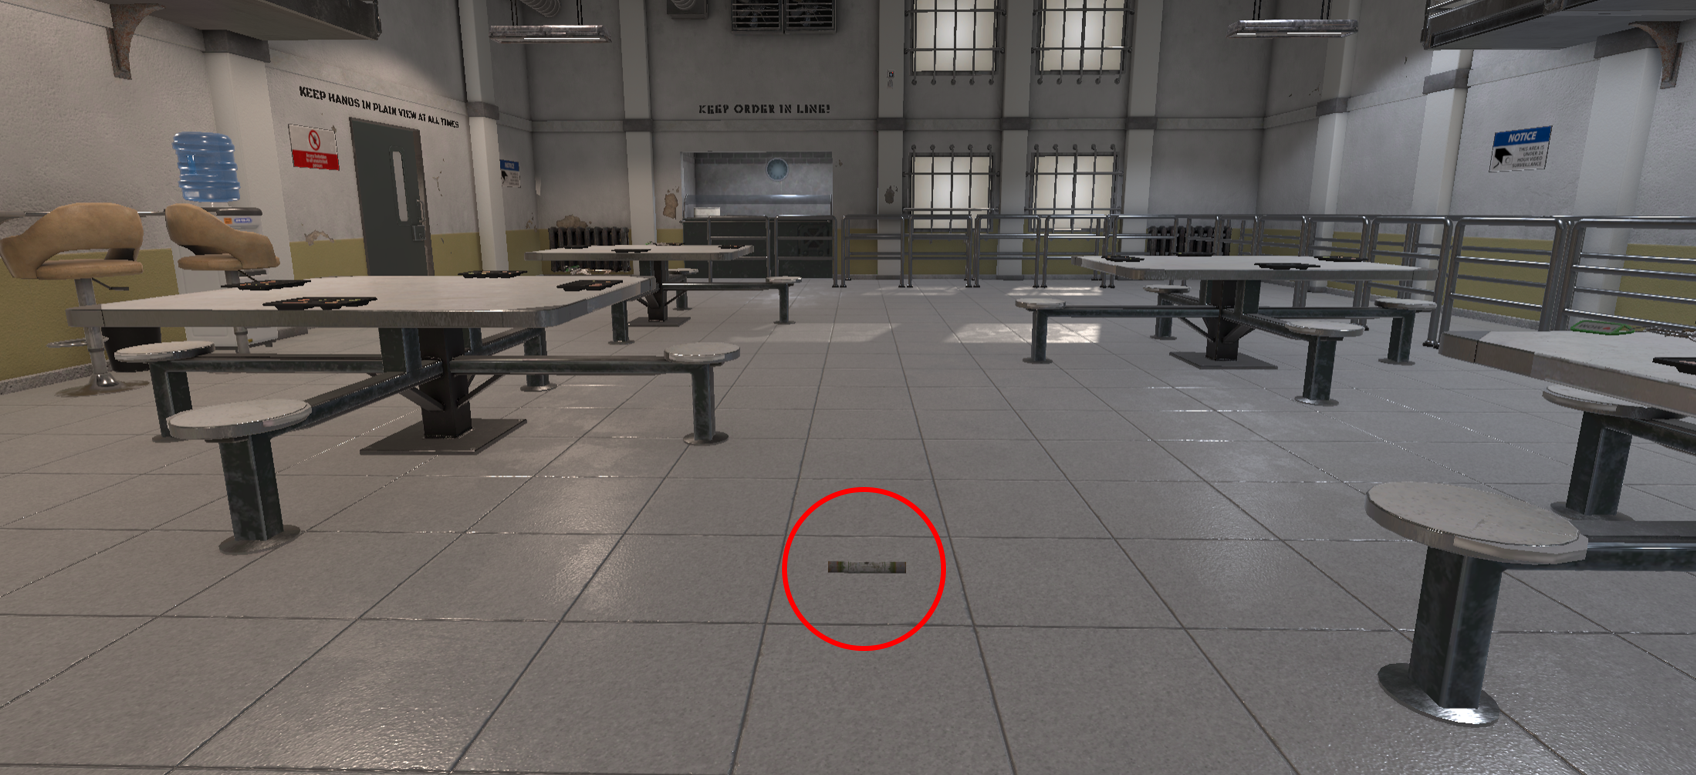 Prison Simulator Walkthrough Guide - Fuse Locations-Special Spices-Computer Password - Fuse Locations - Power Outage - CC4E463